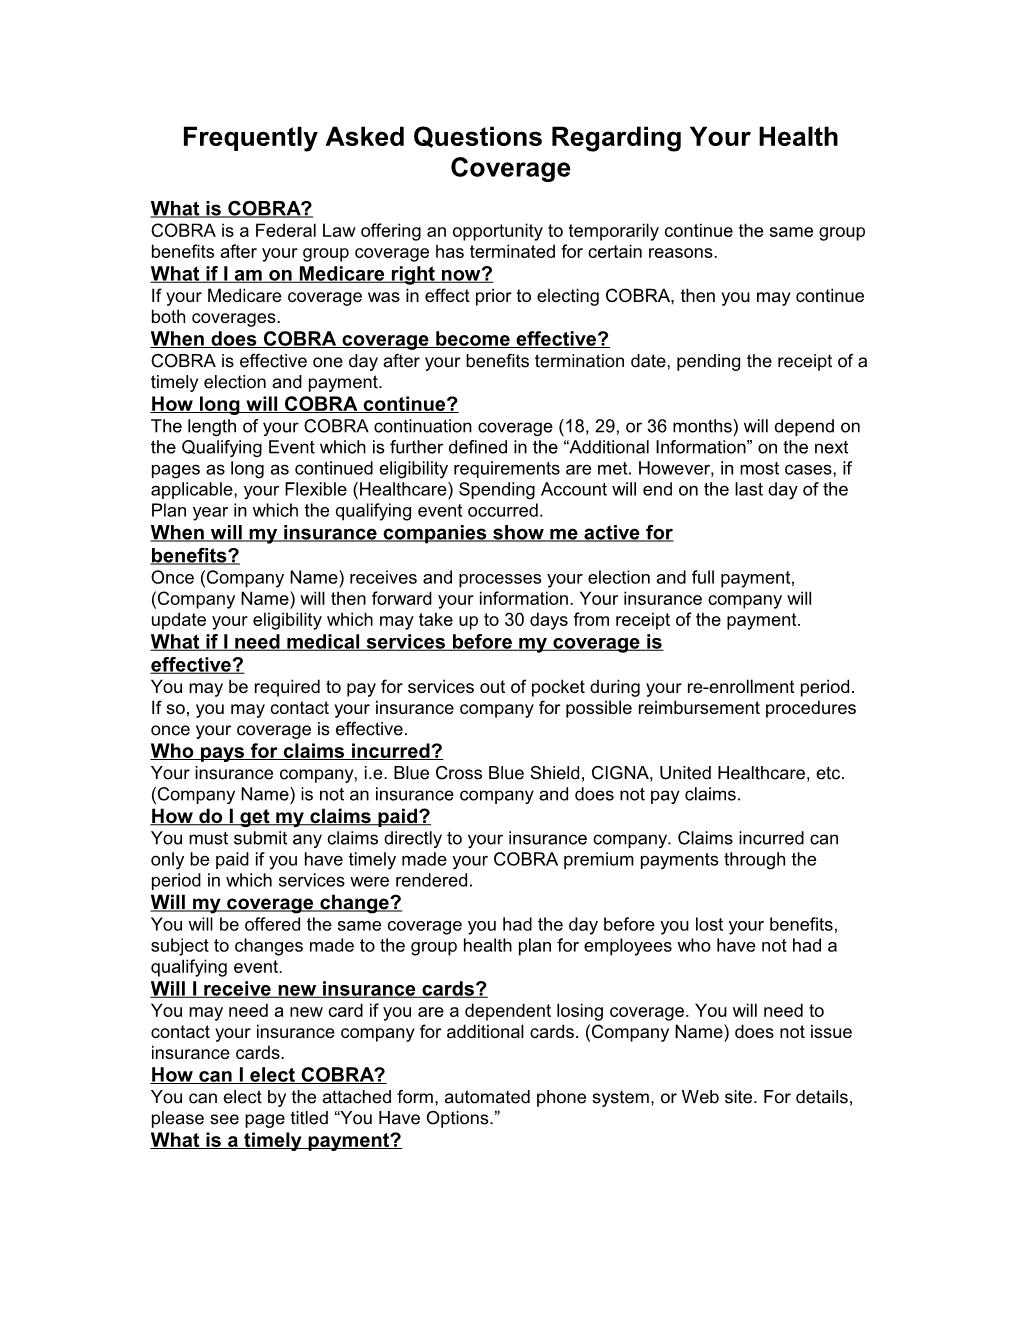 Frequently Asked Questions Regarding Your Health Coverage